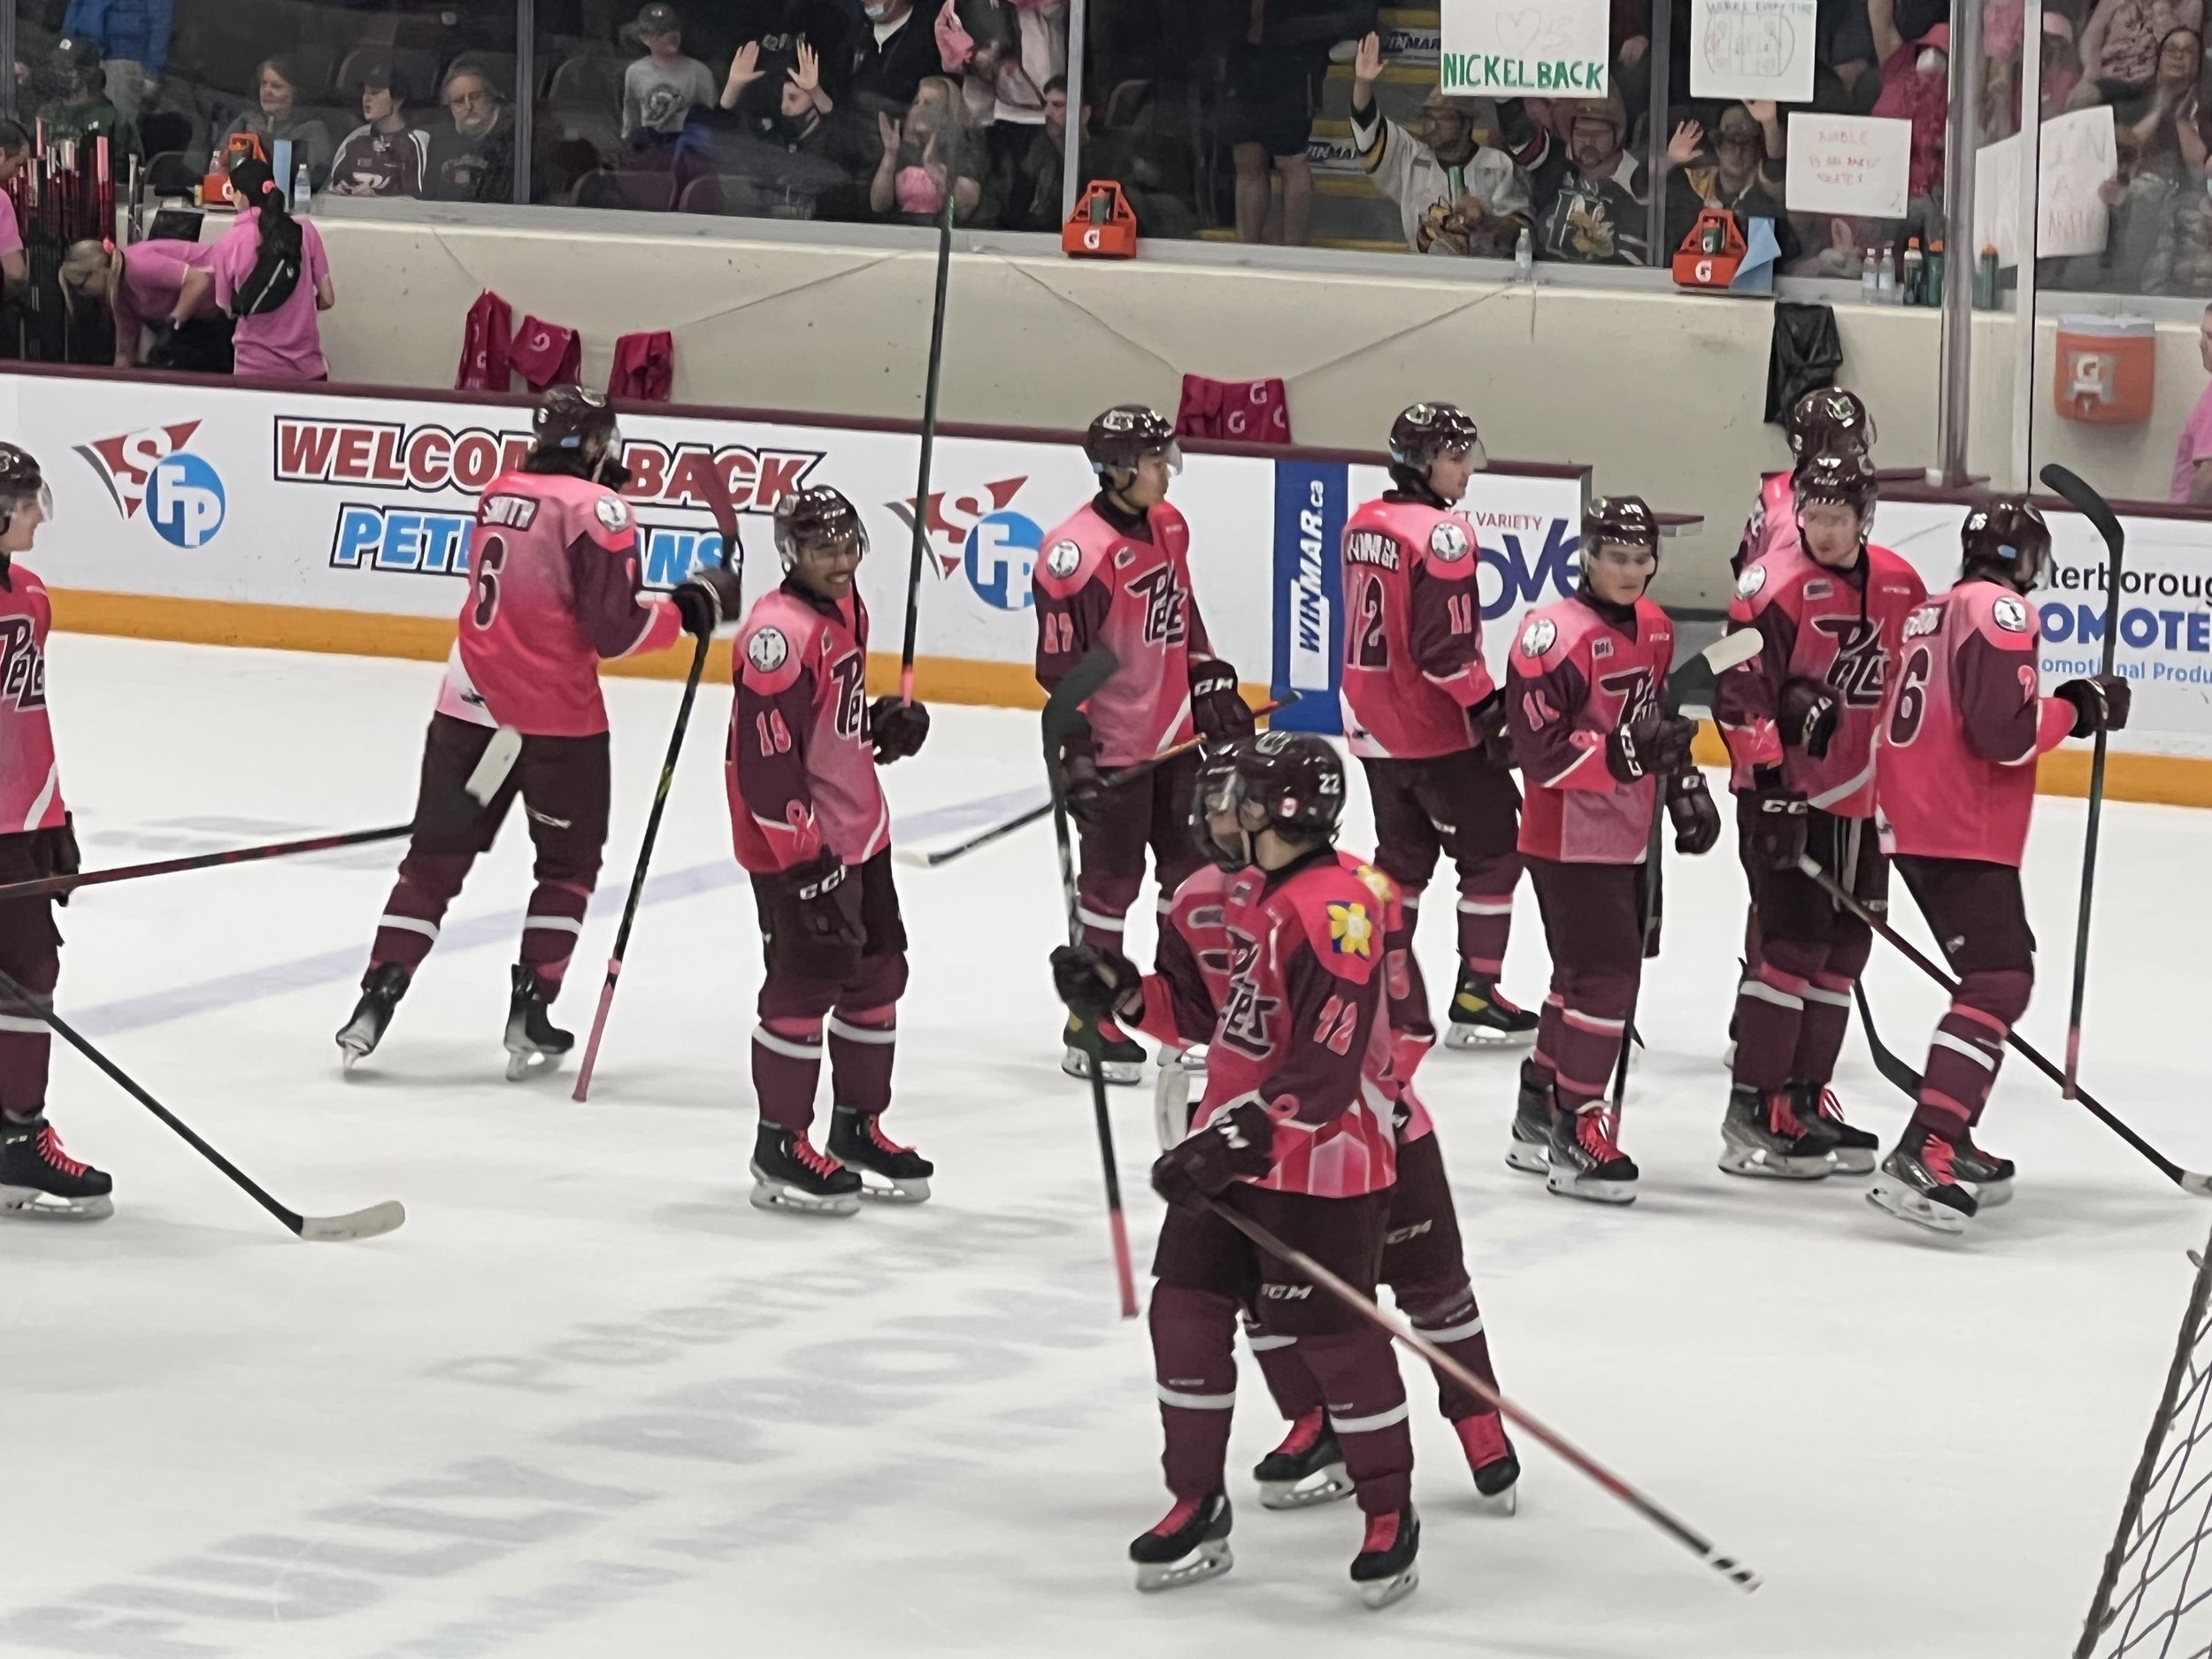 Panthers 'Pink in the Rink' game seeks to score goal against breast cancer